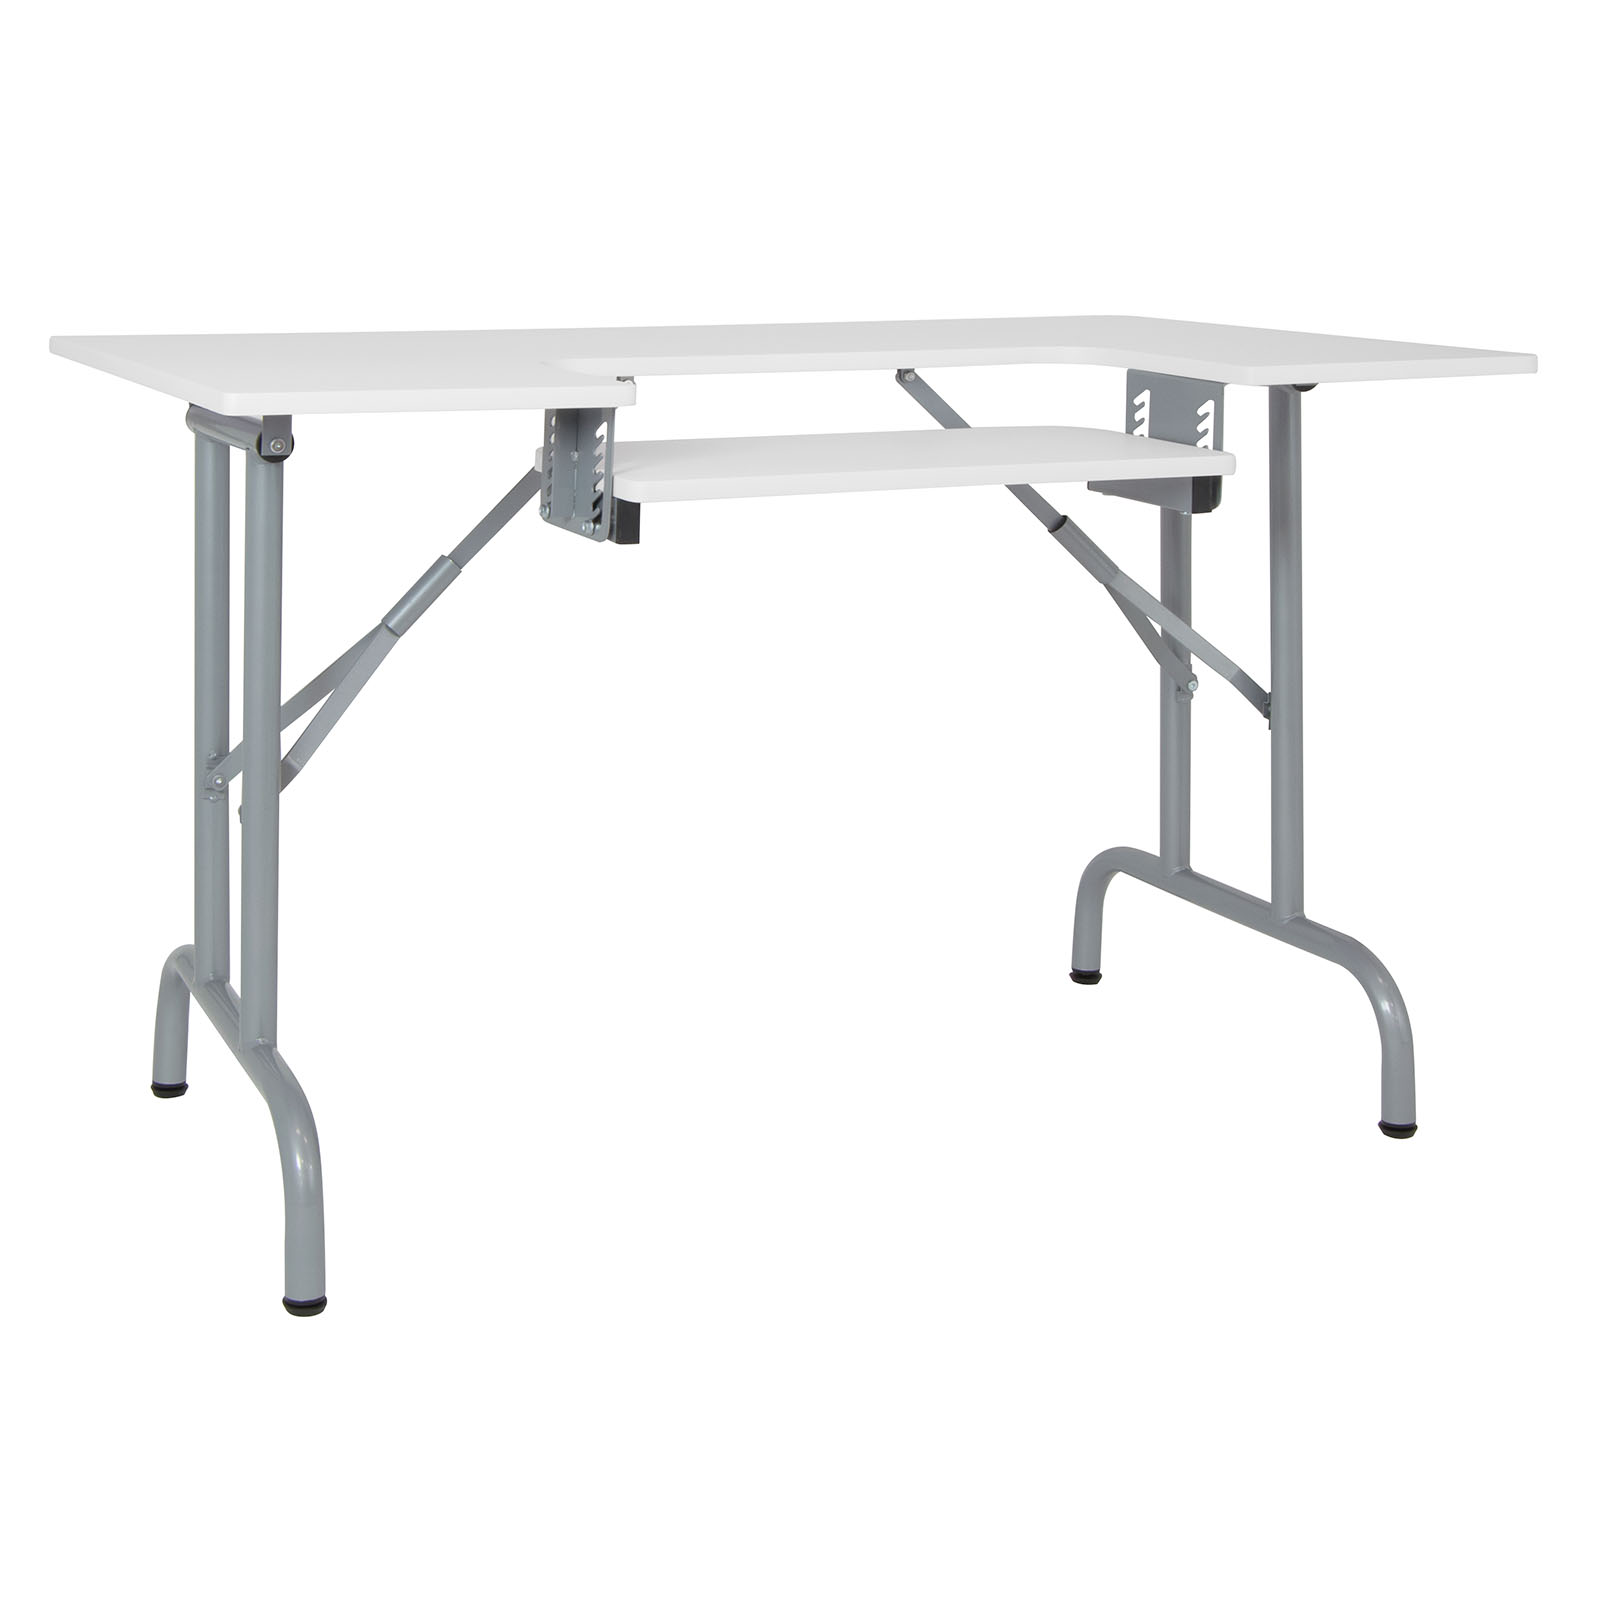 Sew Ready Mobile Craft Table with Folding Top & Storage